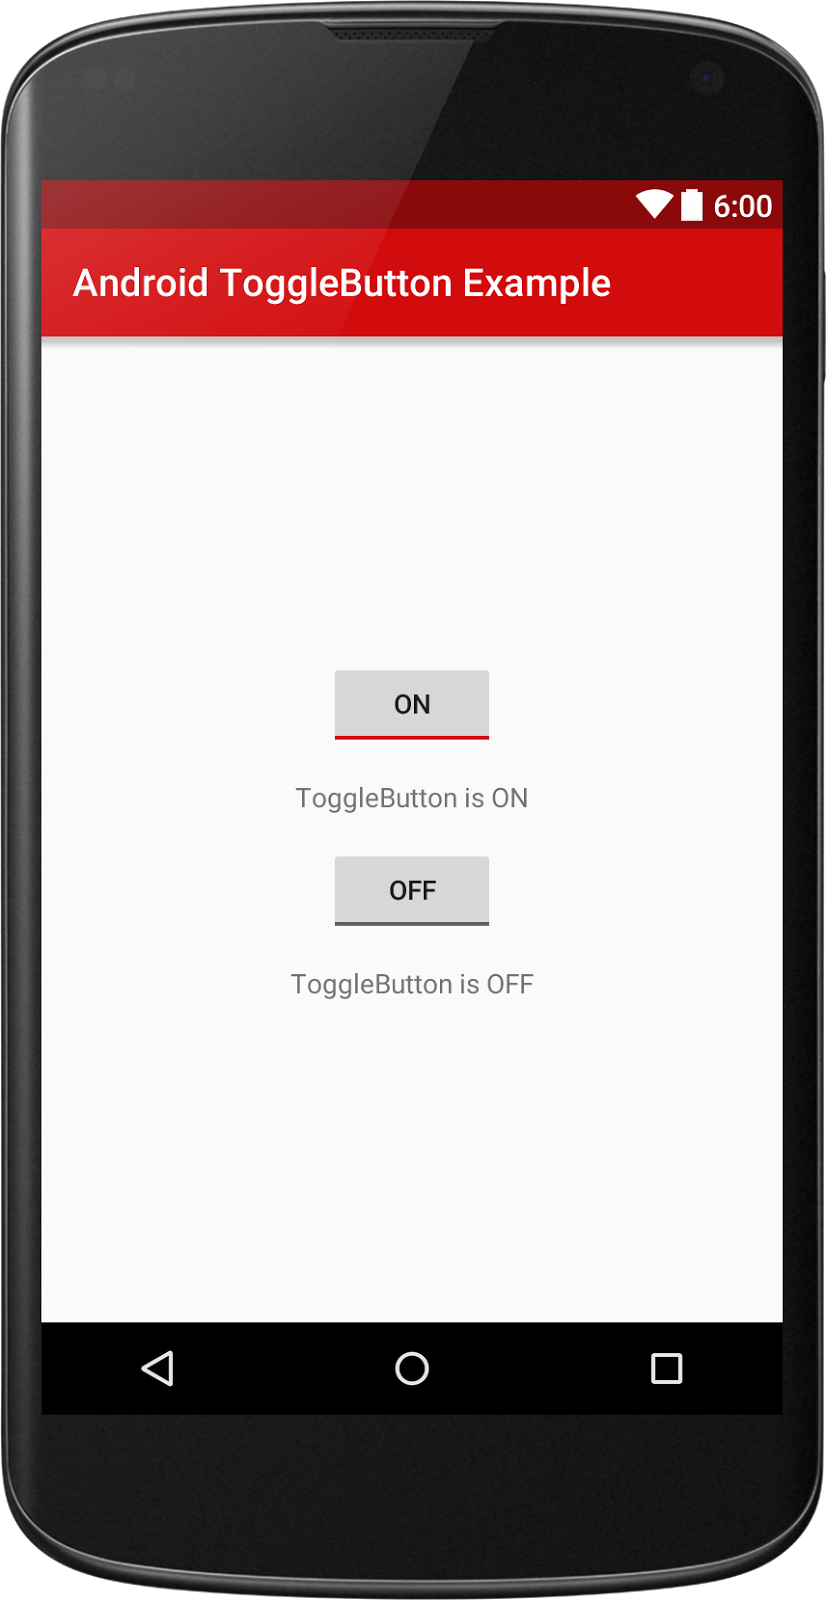 Android ToggleButton Example